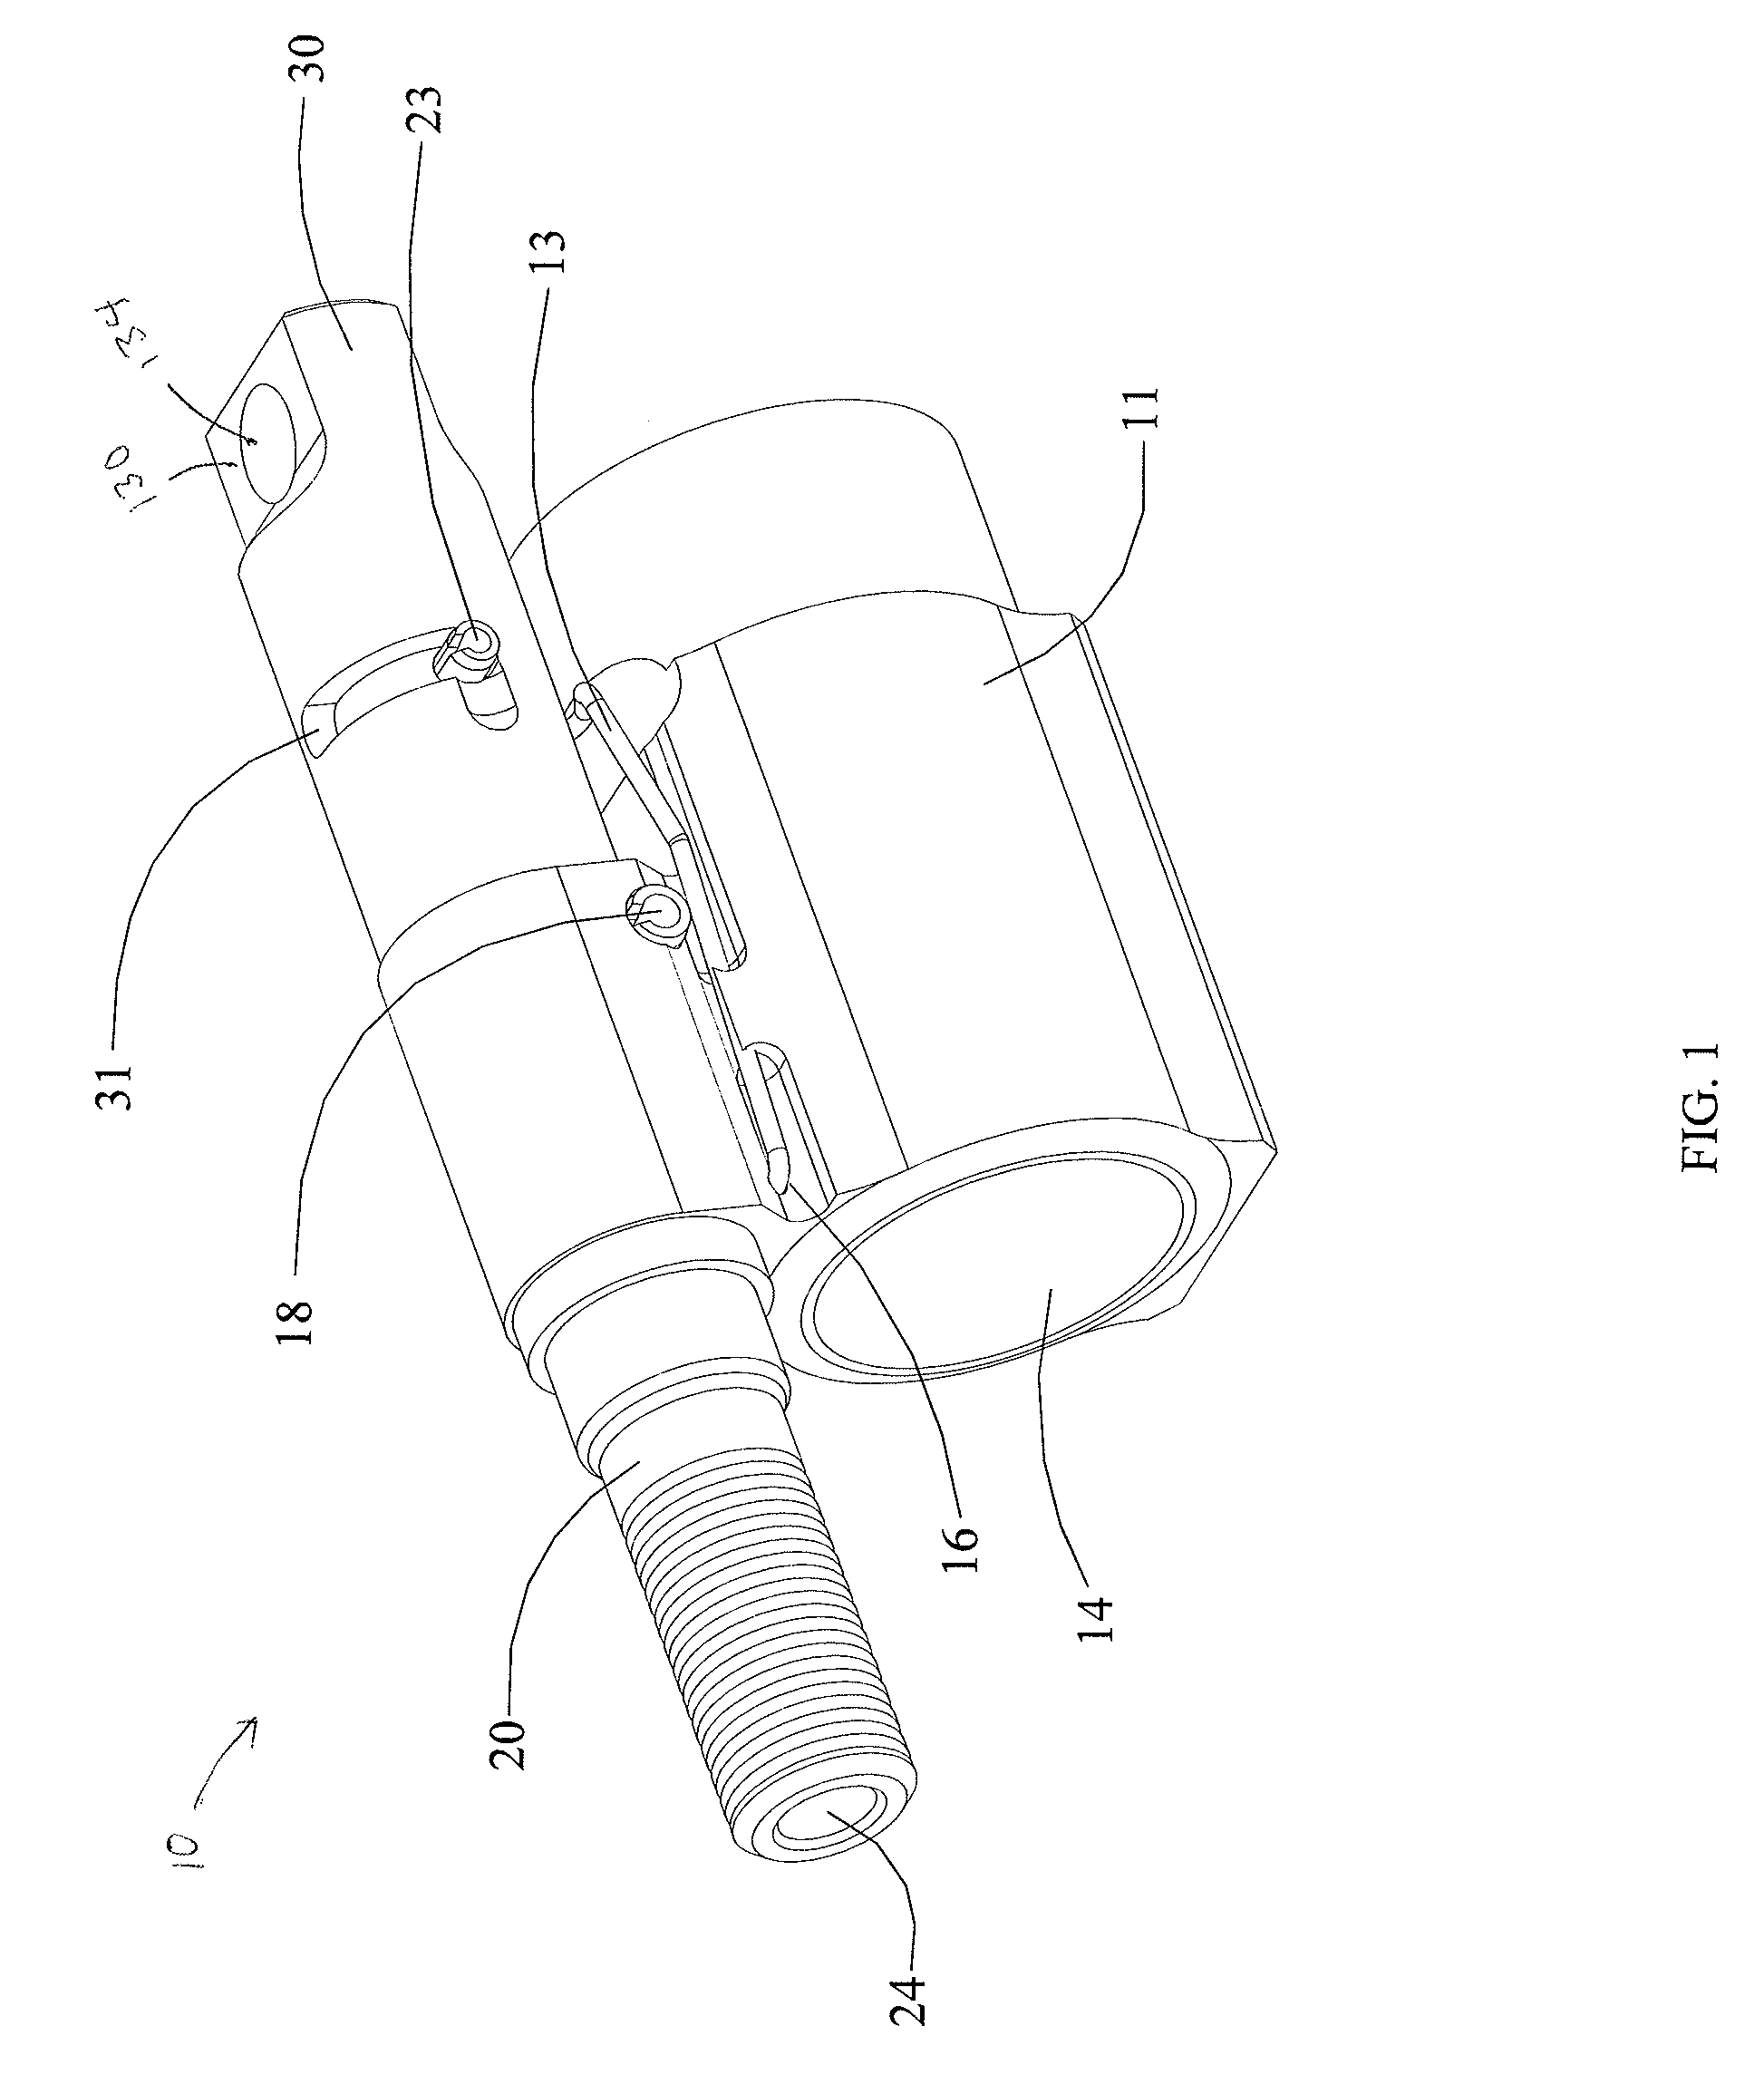 Adjustable gas block for a gas operated firearm